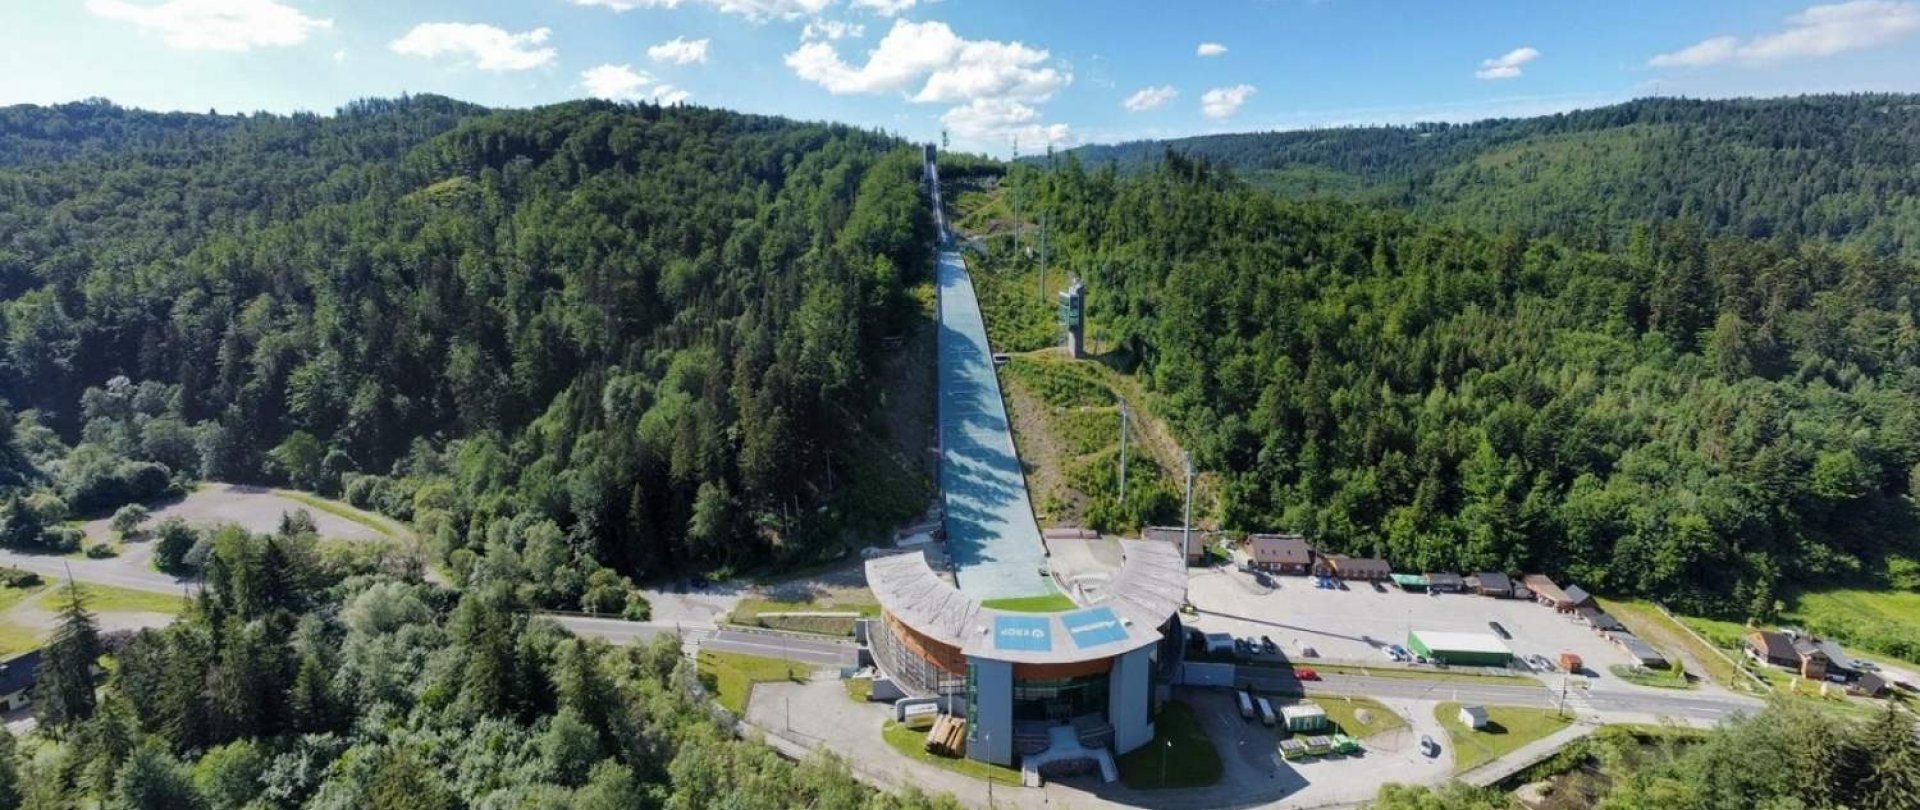 Wisła and Ski Jumping – Summer Grand Prix and World Cup 2022